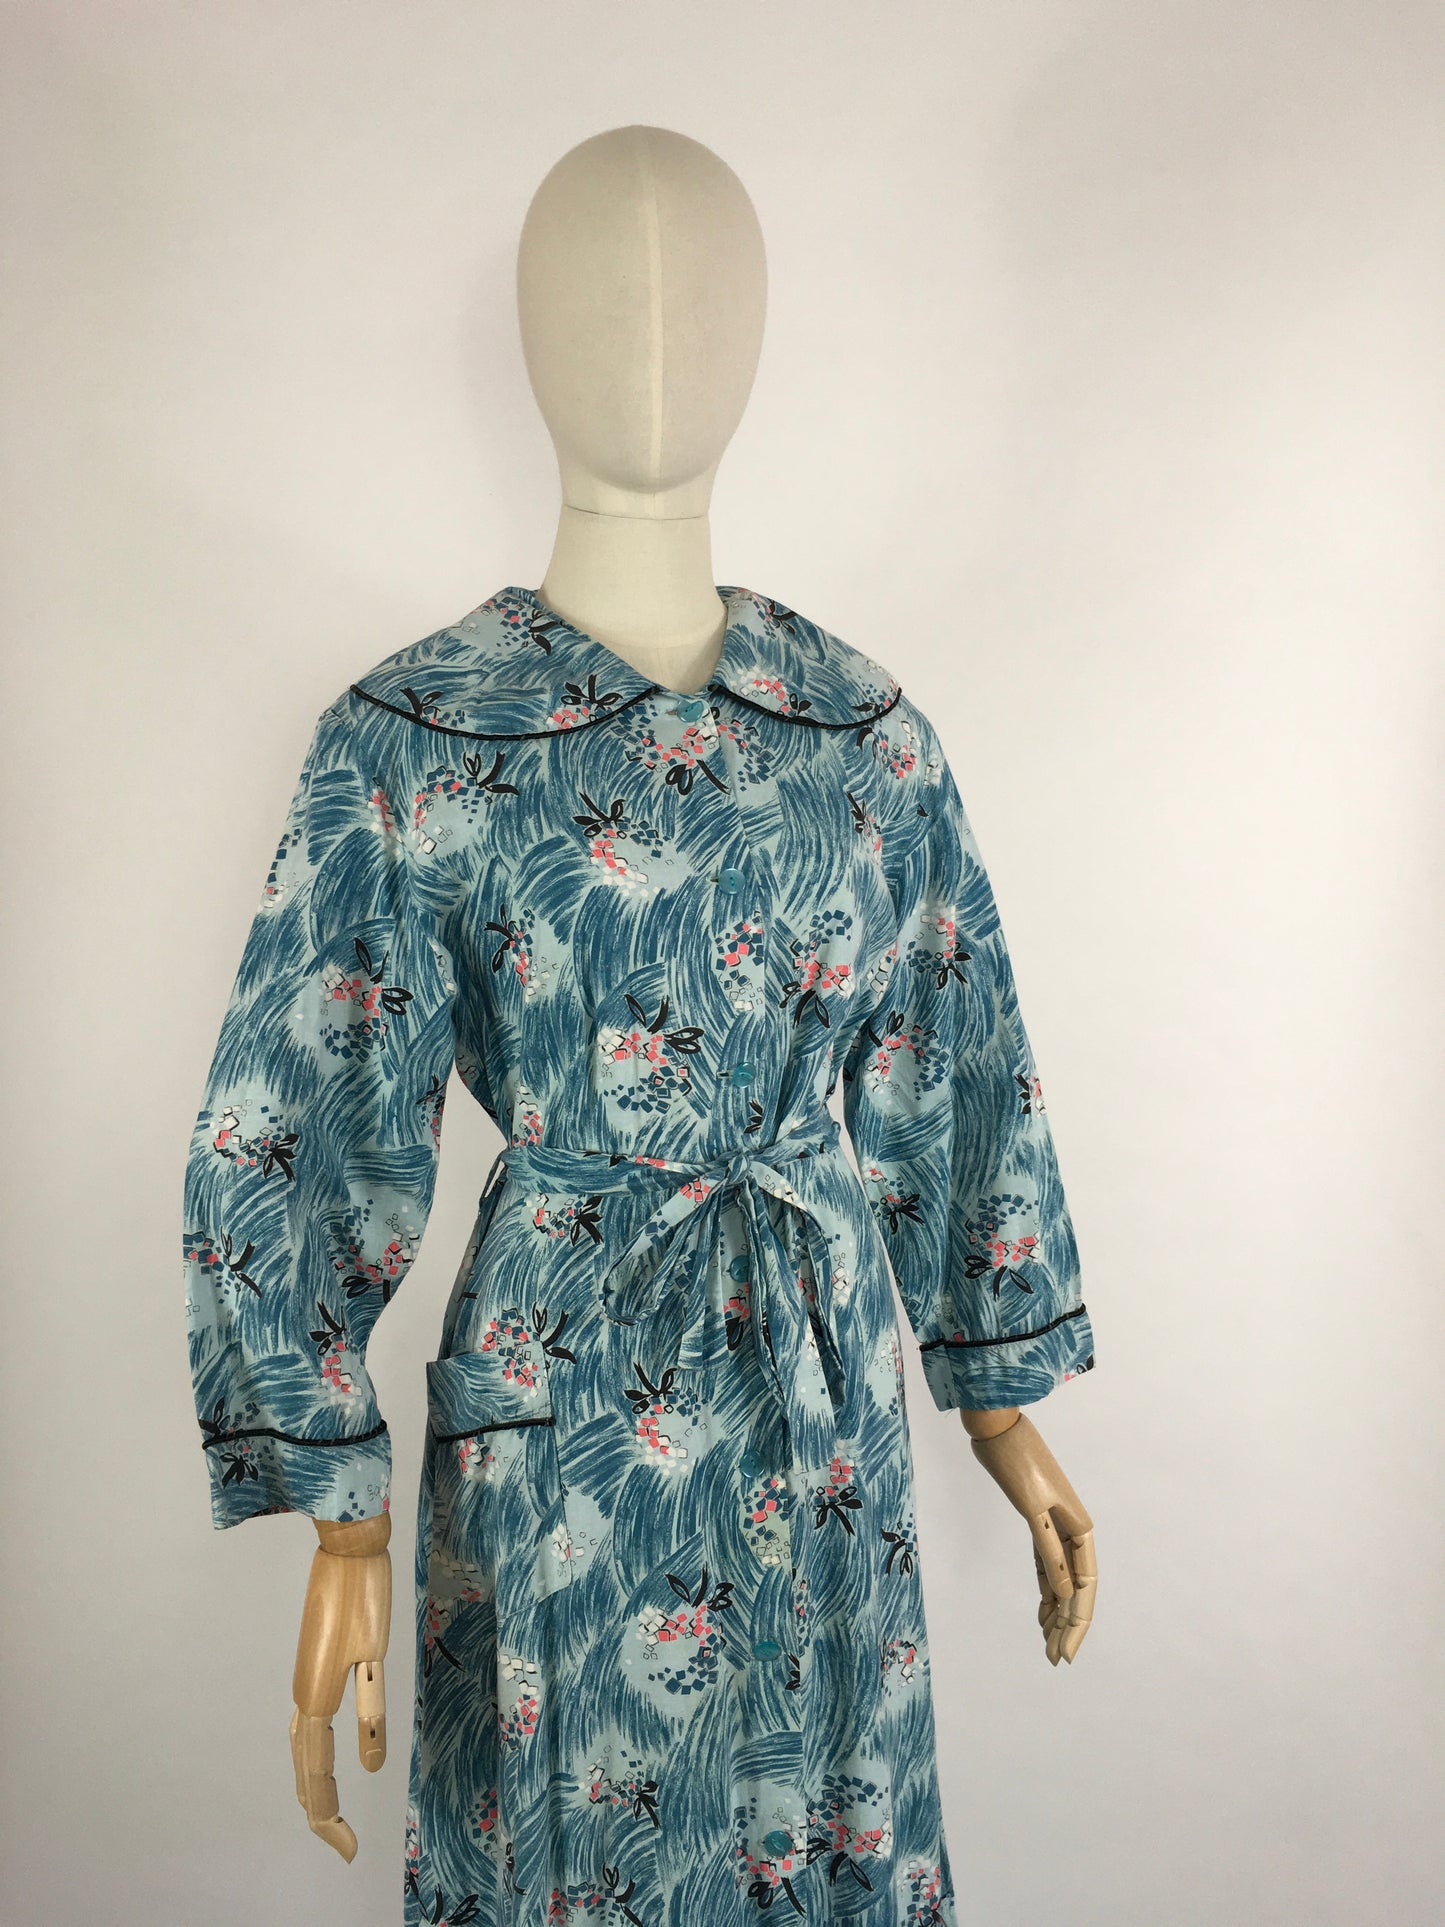 Original 1950s Housecoat by ‘ Pelaw ‘ - Made From a Beautiful Cotton In Blues, Pinks, Yellows and Blacks